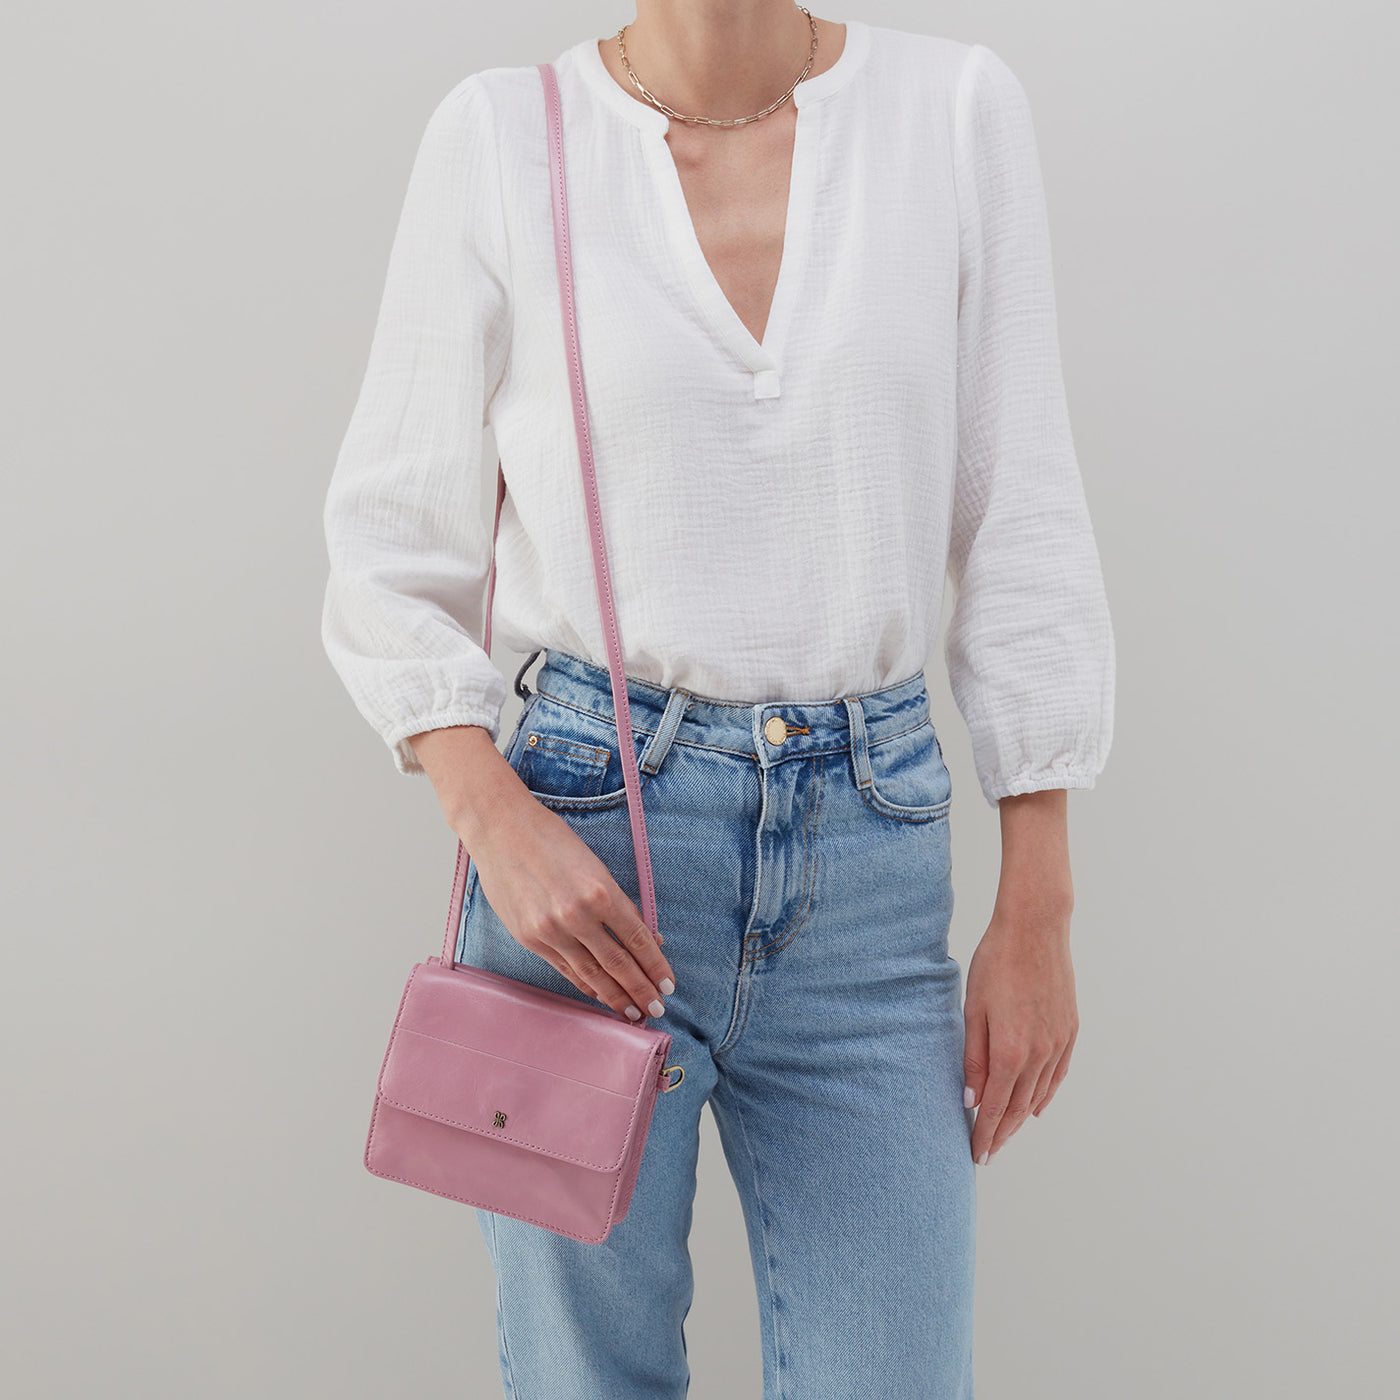 Jill Wallet Crossbody in Polished Leather - Lilac Rose